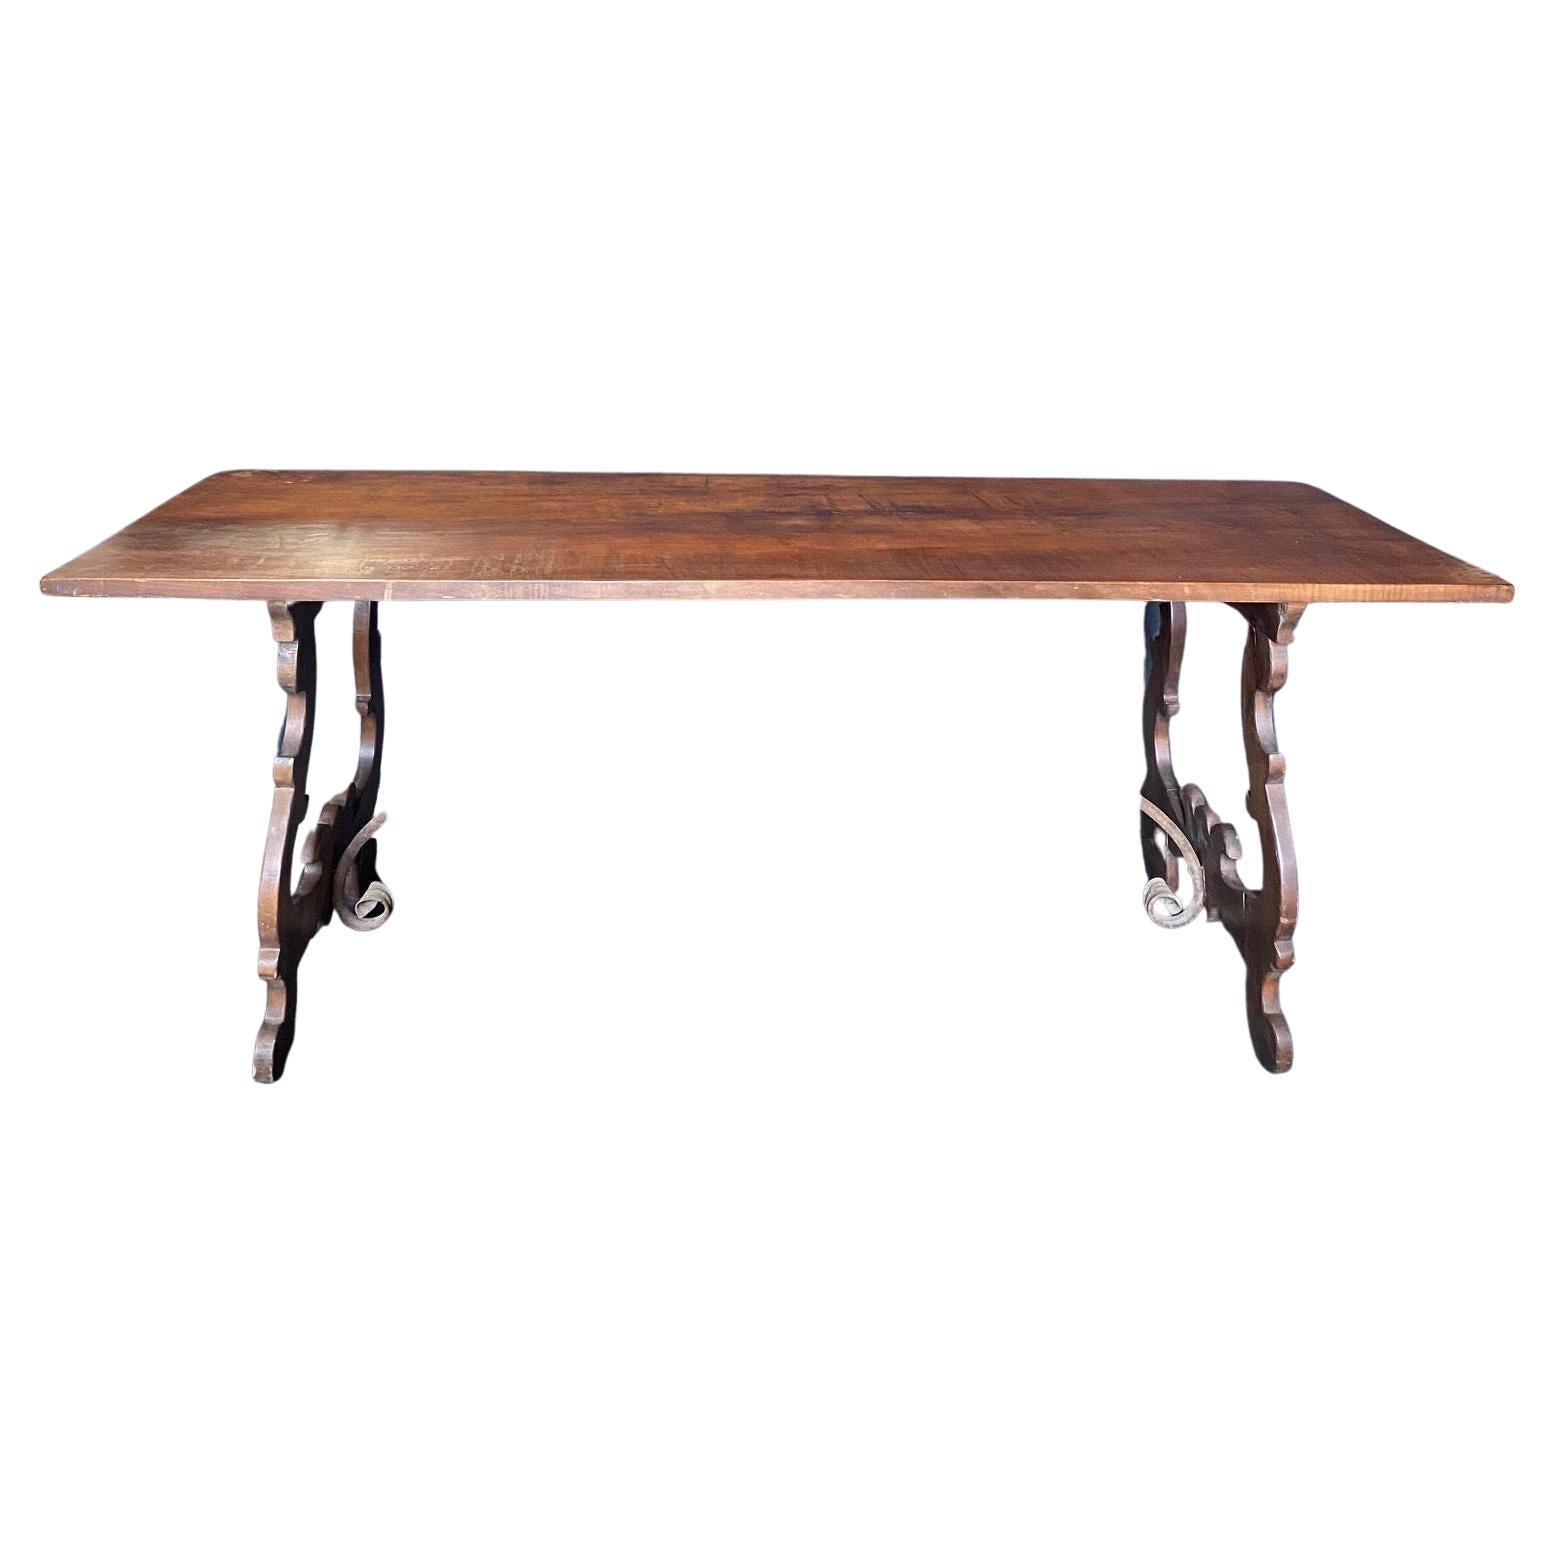 19th Century Italian Walnut Dining Table with Carved Lyre End Supports For Sale